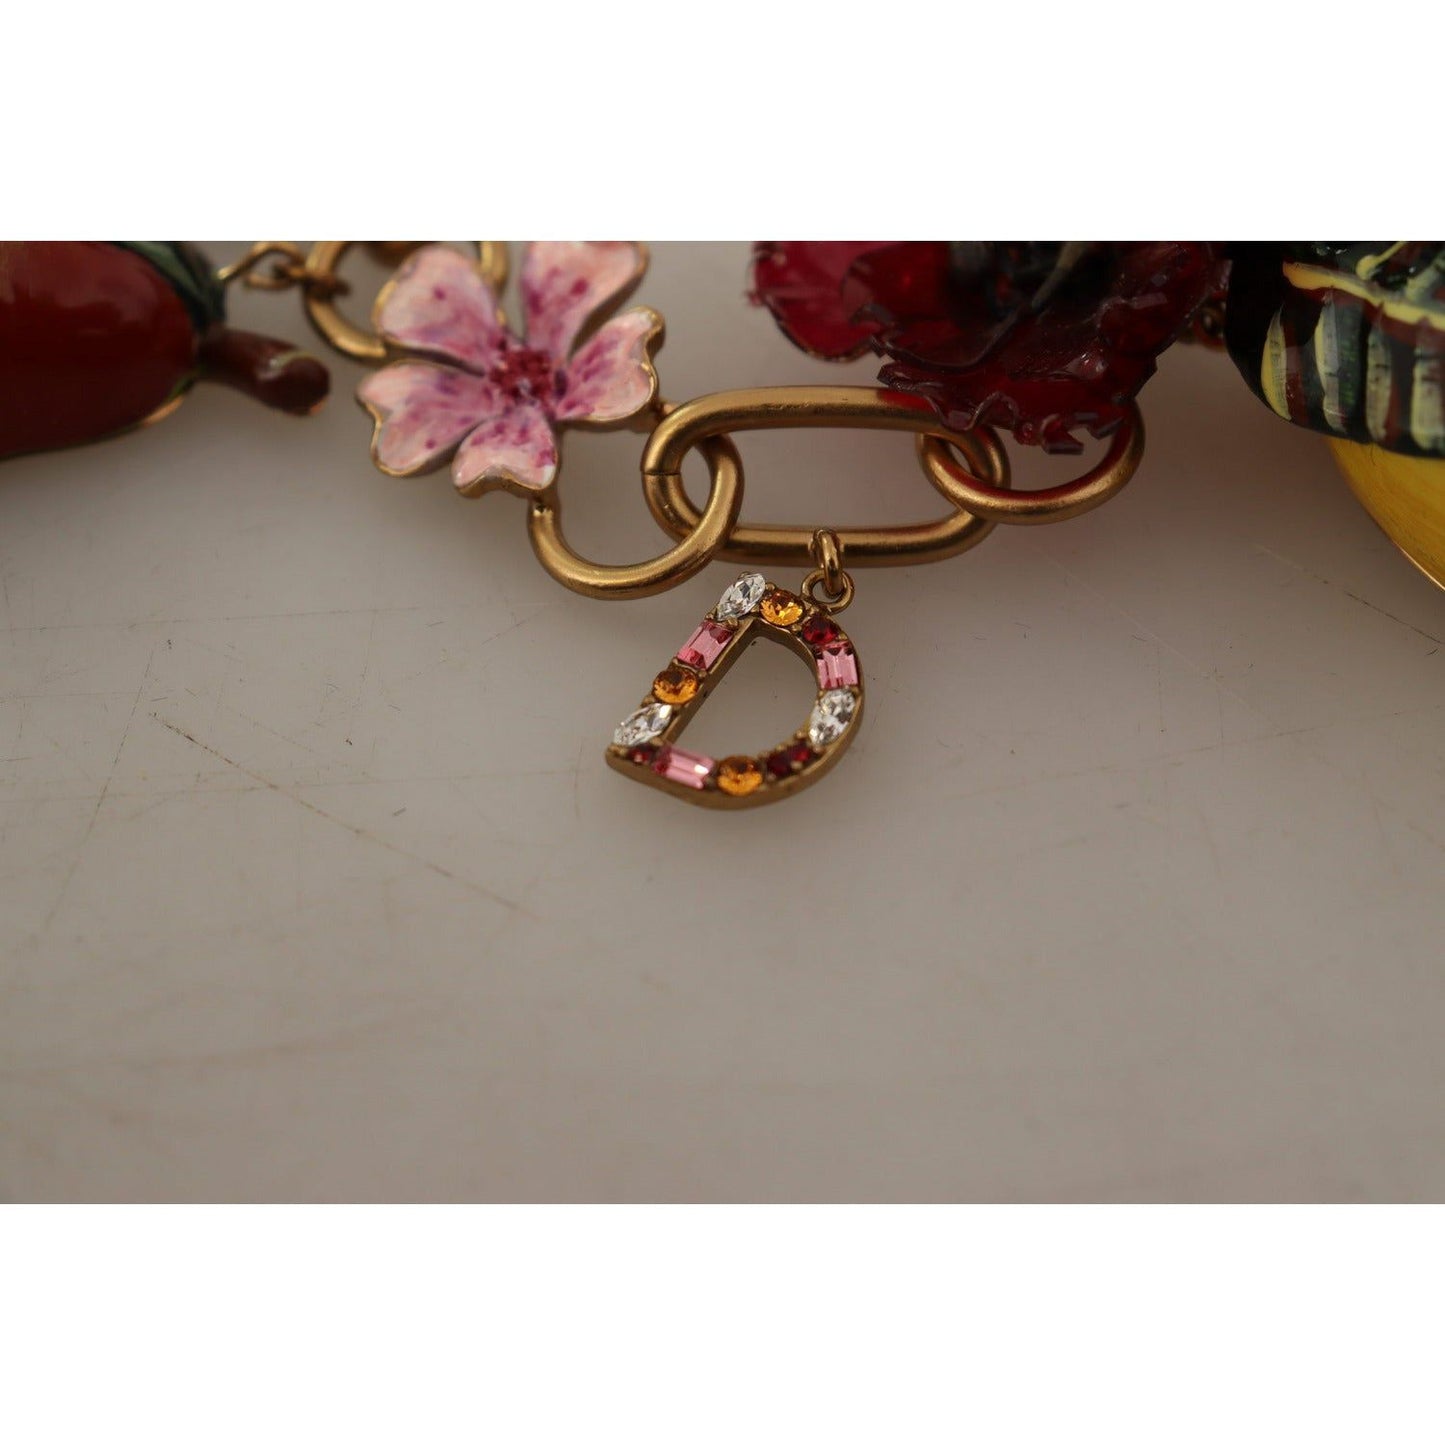 Dolce & Gabbana Chic Gold Statement Sicily Fruit Necklace gold-brass-sicily-fruits-roses-statement-necklace WOMAN NECKLACE IMG_1916-scaled-f344462c-8f8.jpg